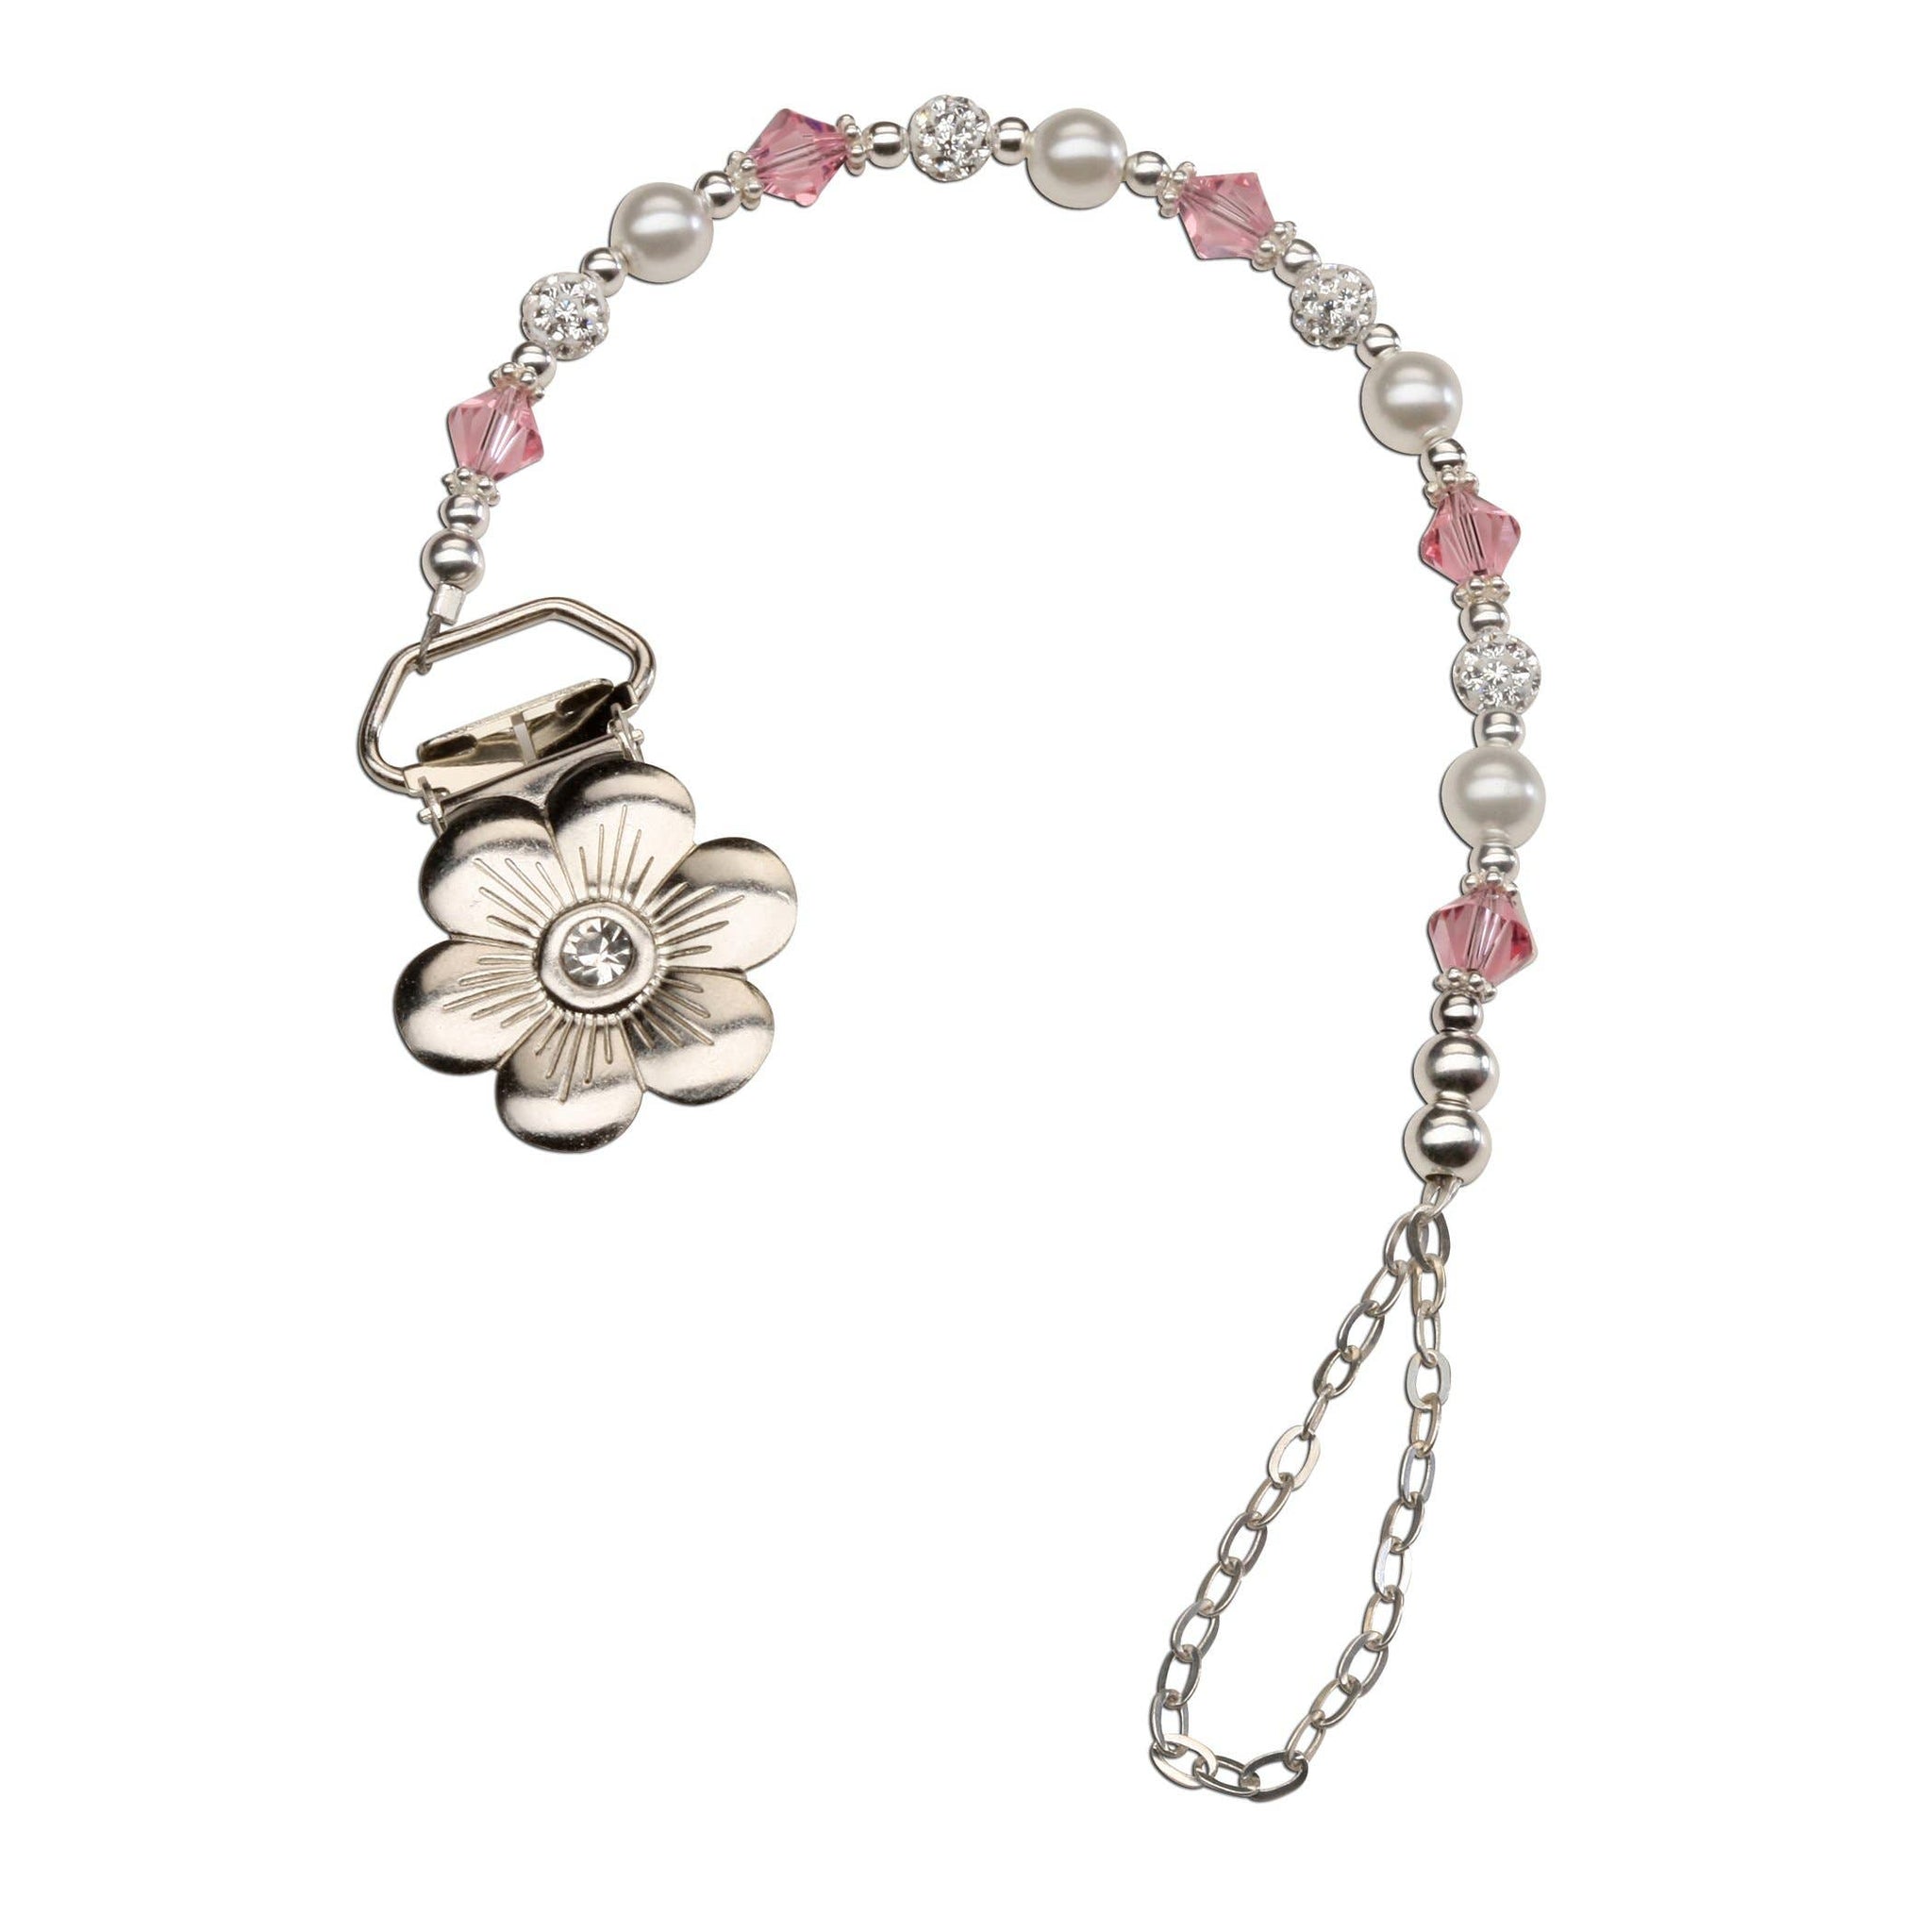 Cherished Moments - Sterling Silver Baby Girl Pearl Binky Pacifier Clip w/Daisy